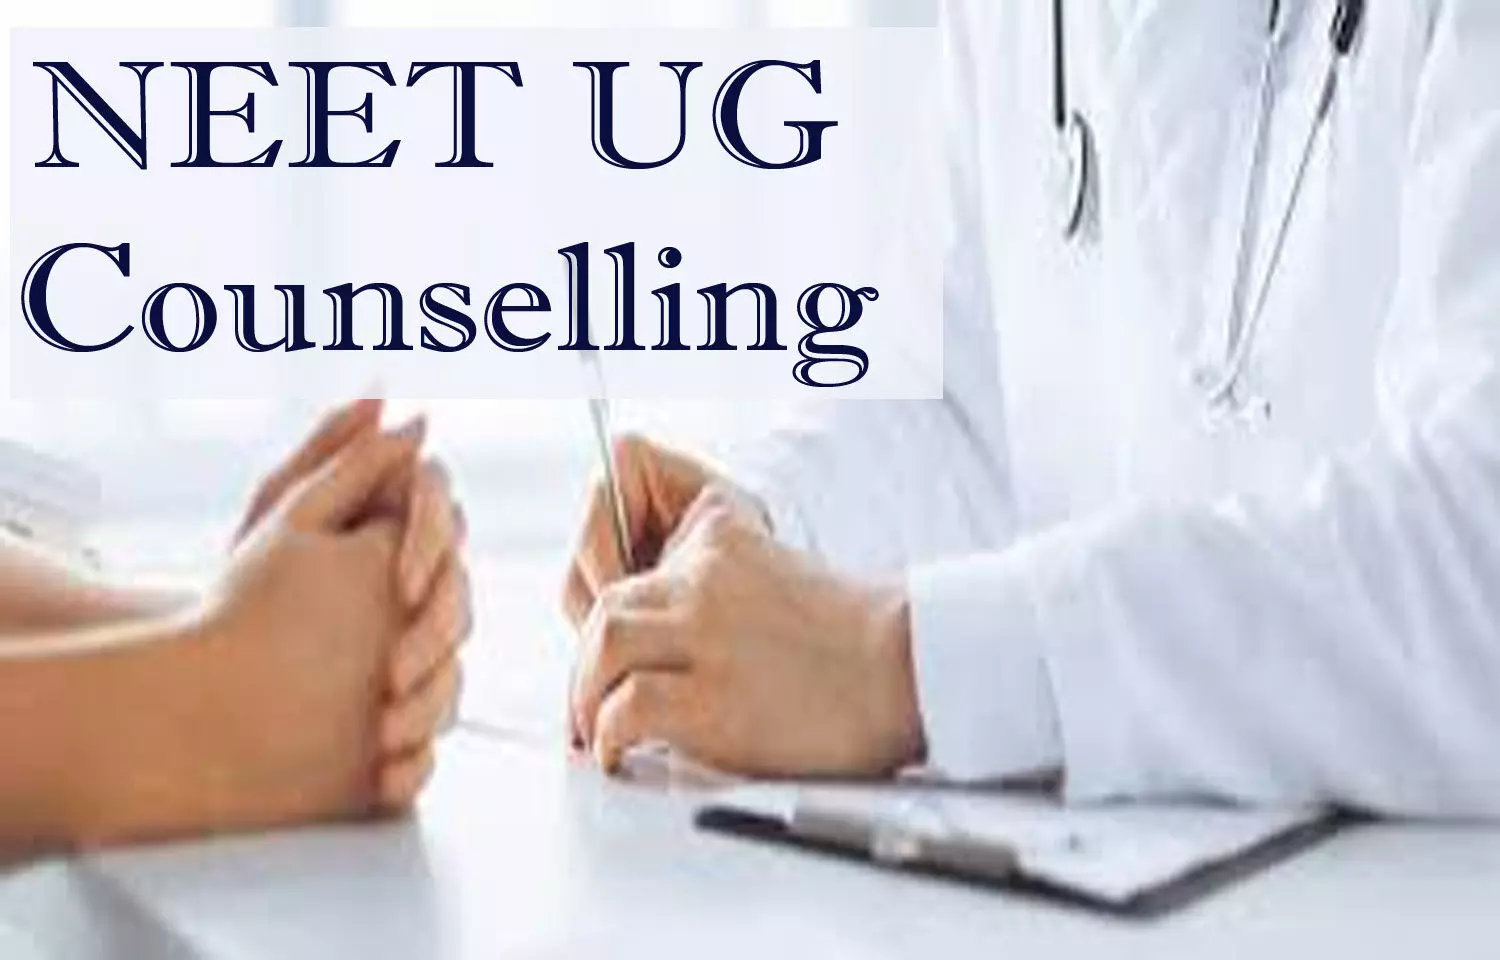 MCC NEET Counselling for MBBS, BDS Admissions 2021: Check out Counselling scheme, eligibility criteria, details